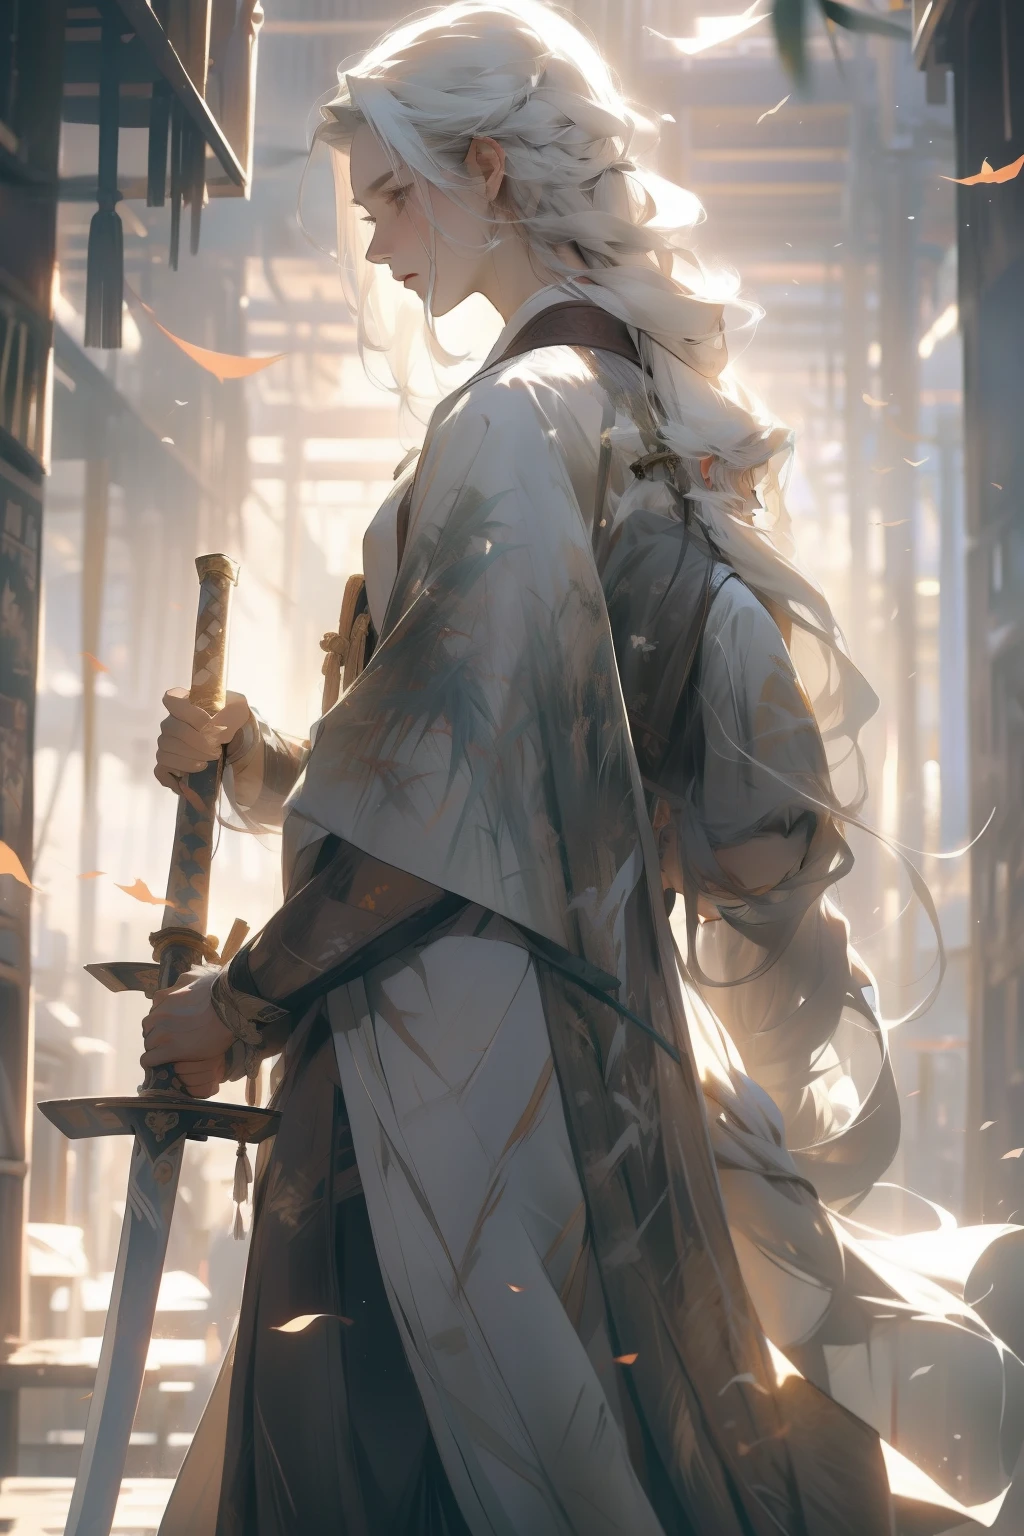 A man with long white hair,Standing in a bamboo forest,Holding a long sword,Facing away,Wear a white robe,Hold the streamer sword,man